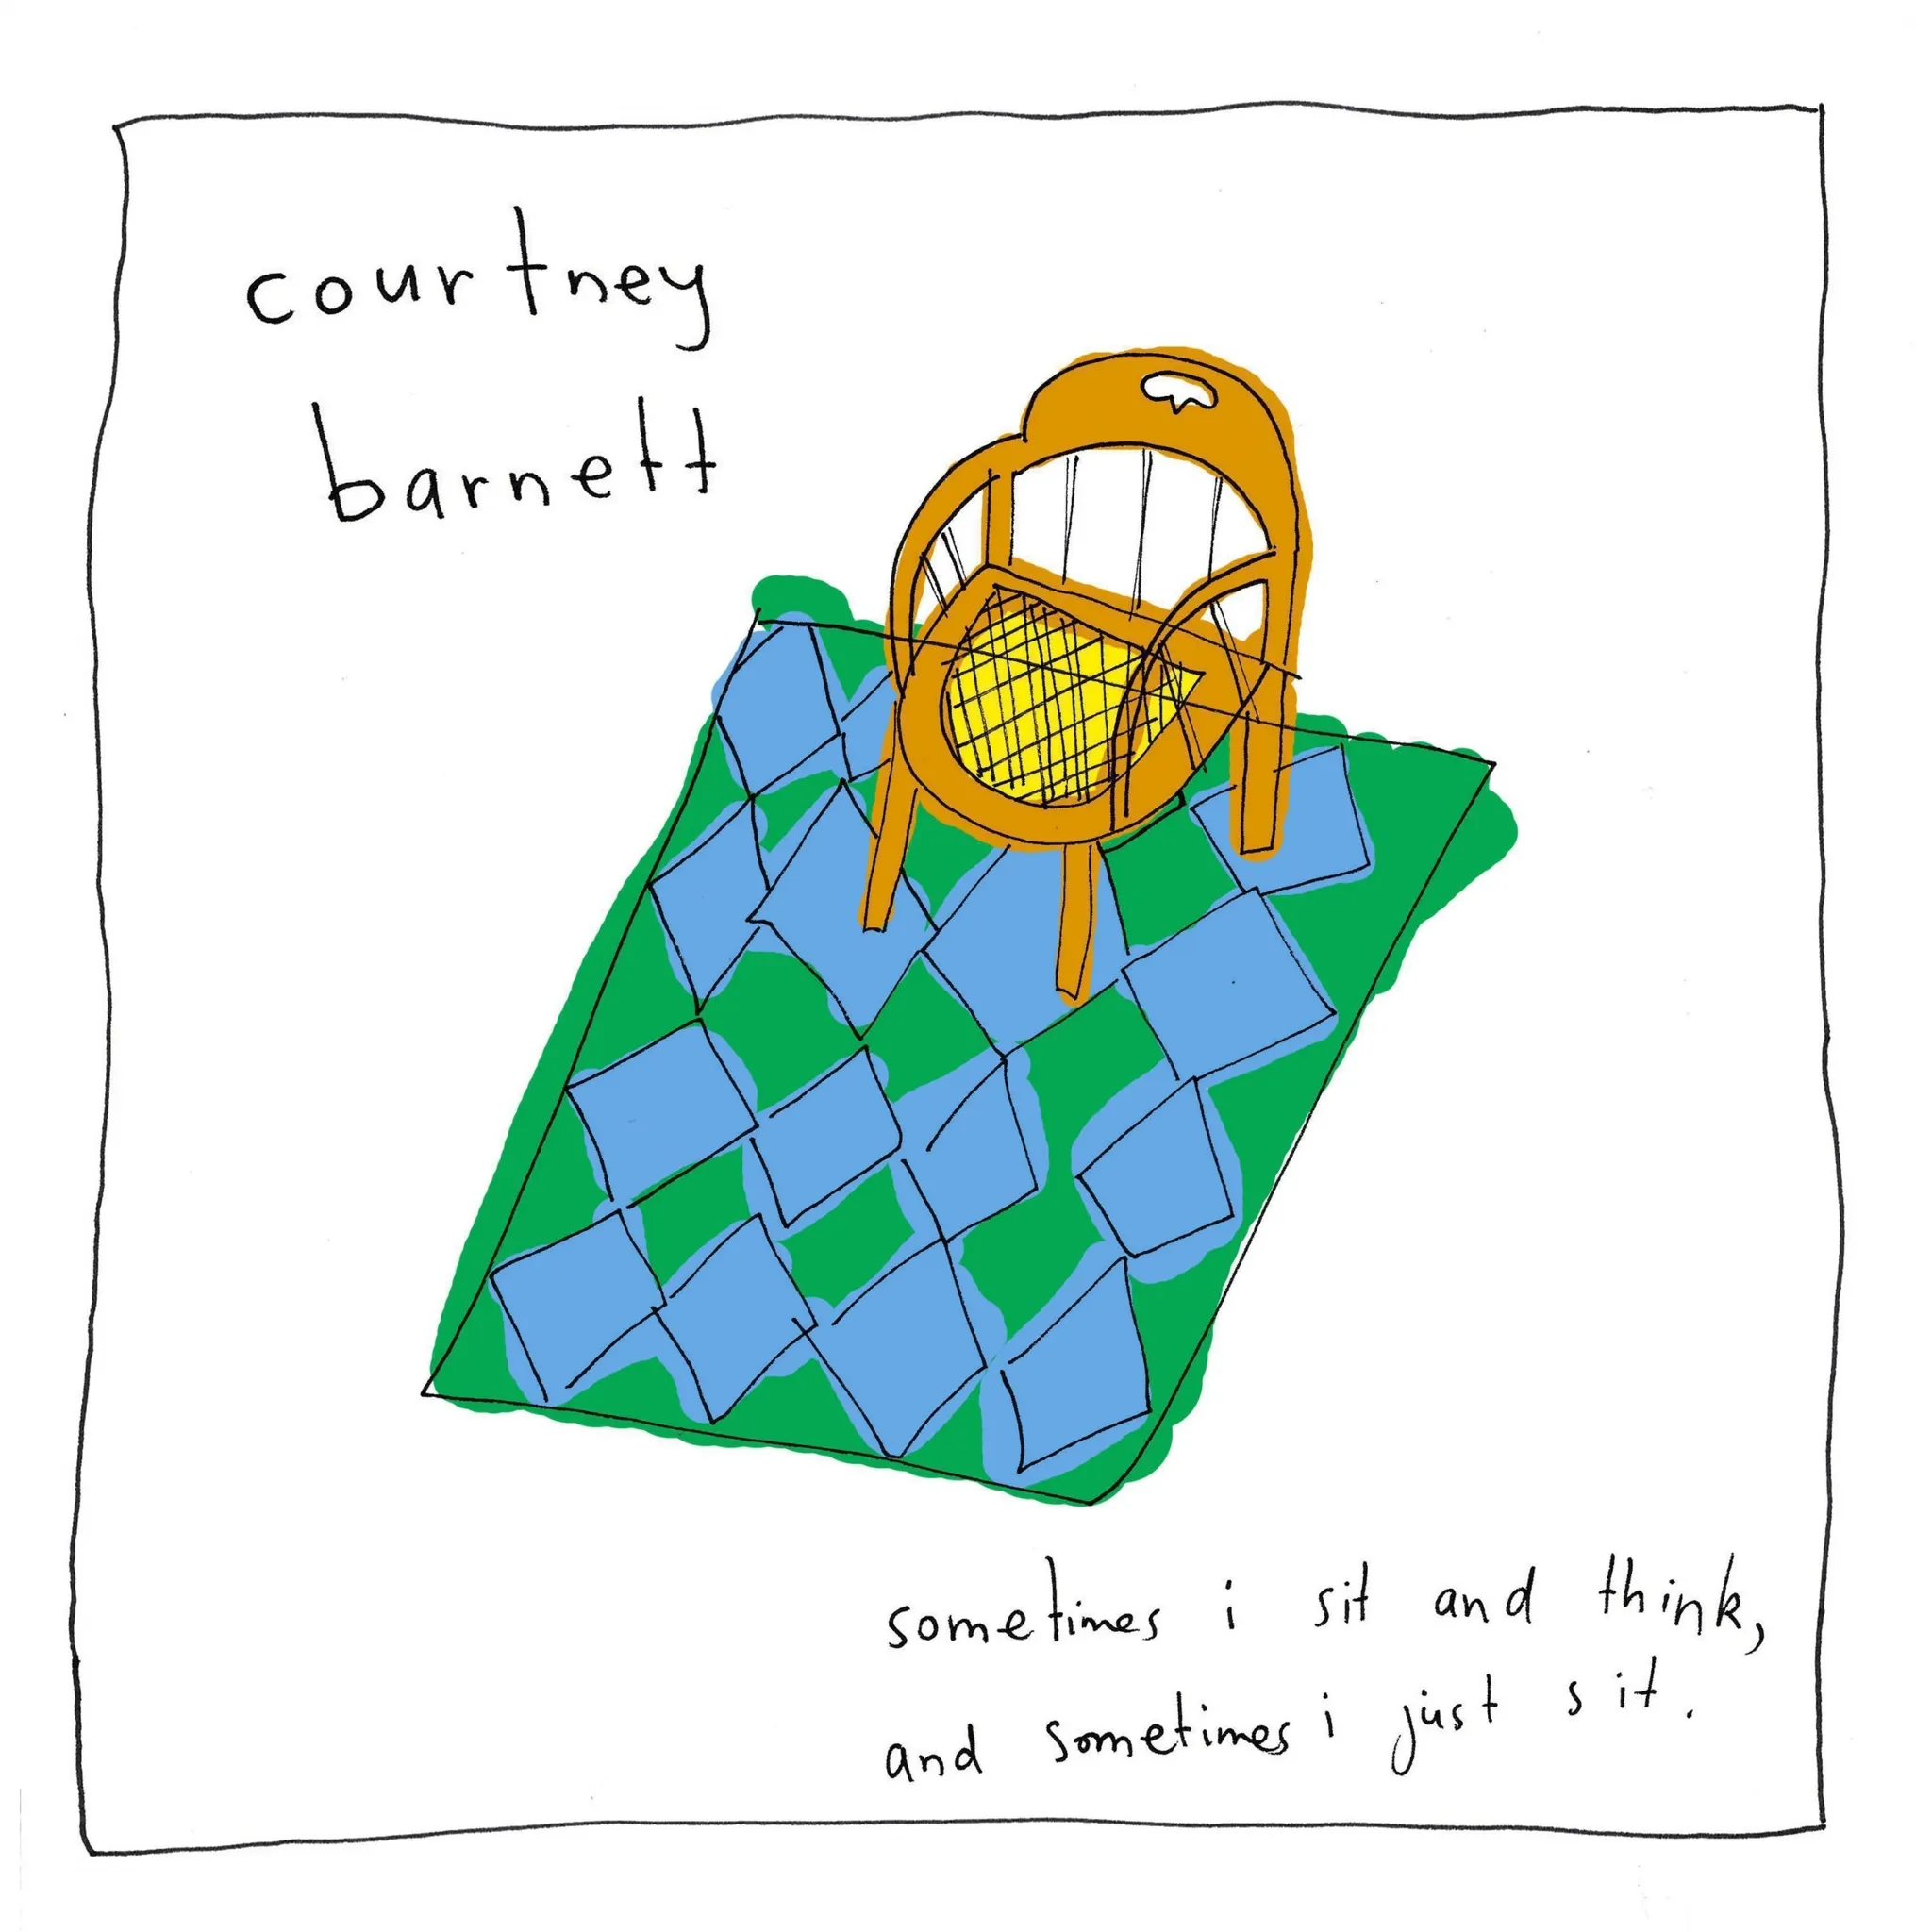 Courtney Barnett - Sometimes I Sit and Think, and Sometimes I Just Sit. artwork